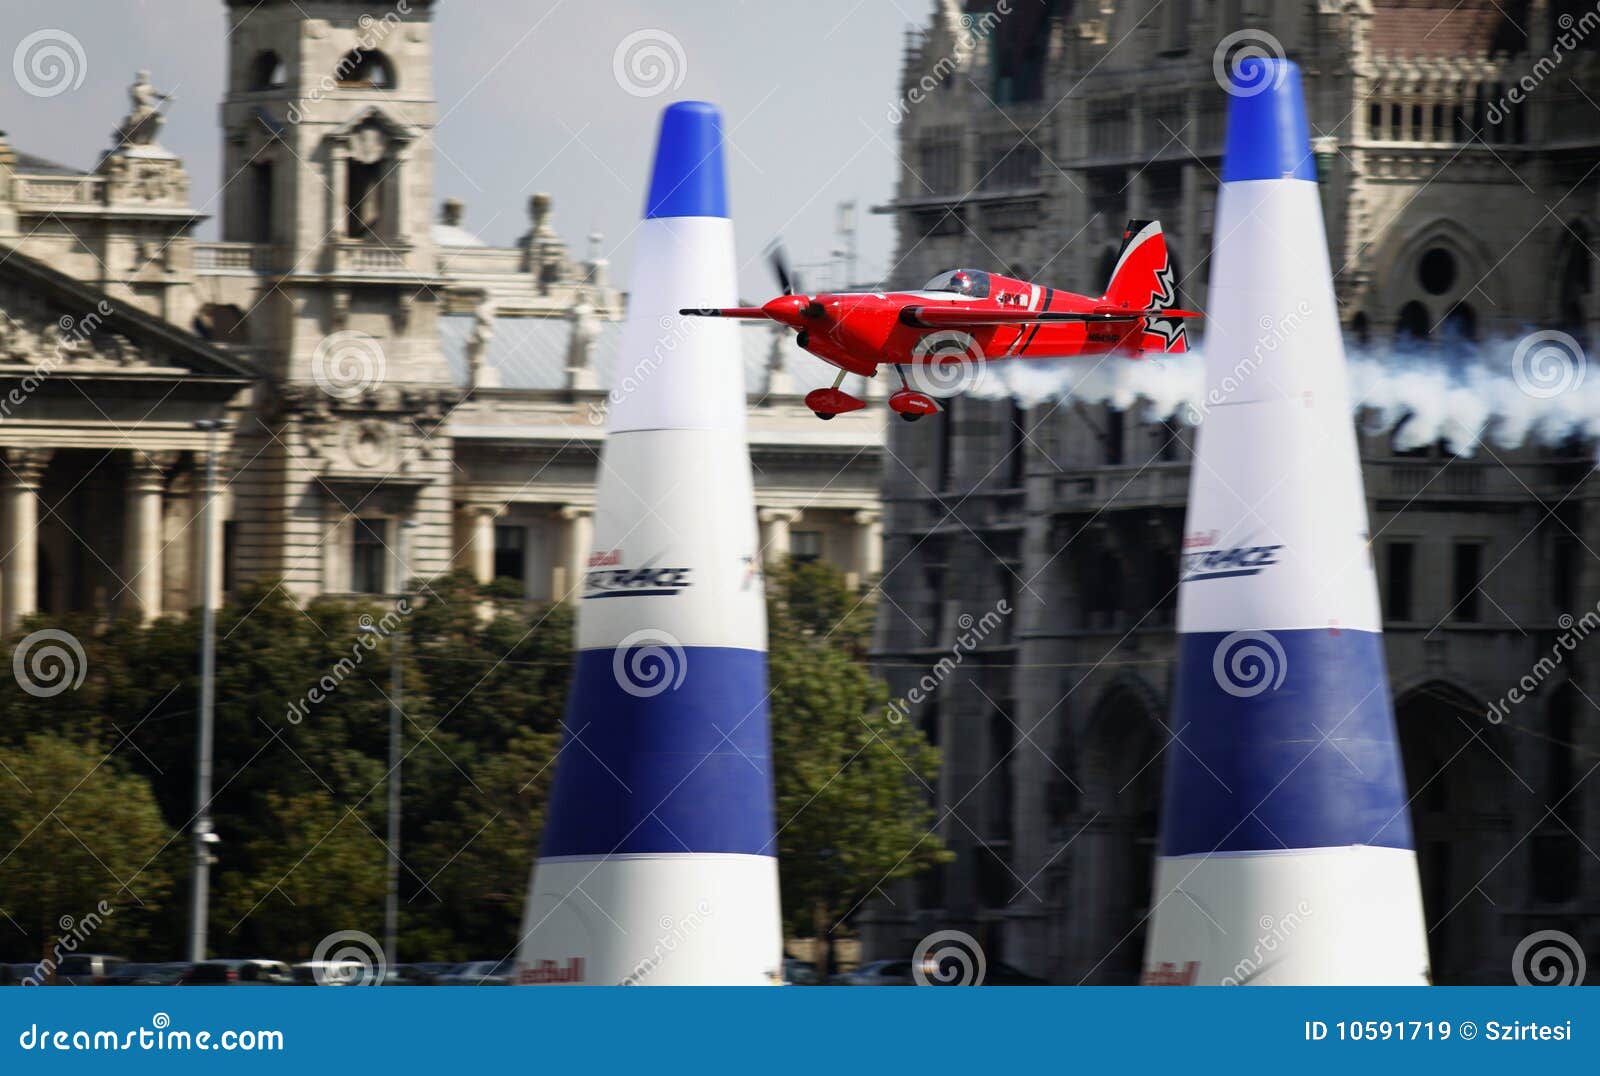 BUDAPEST - AUGUST 18: An unidentified light air craft in training for Red Bull Air Race competition August 18, 2009 in Budapest, Hungary.